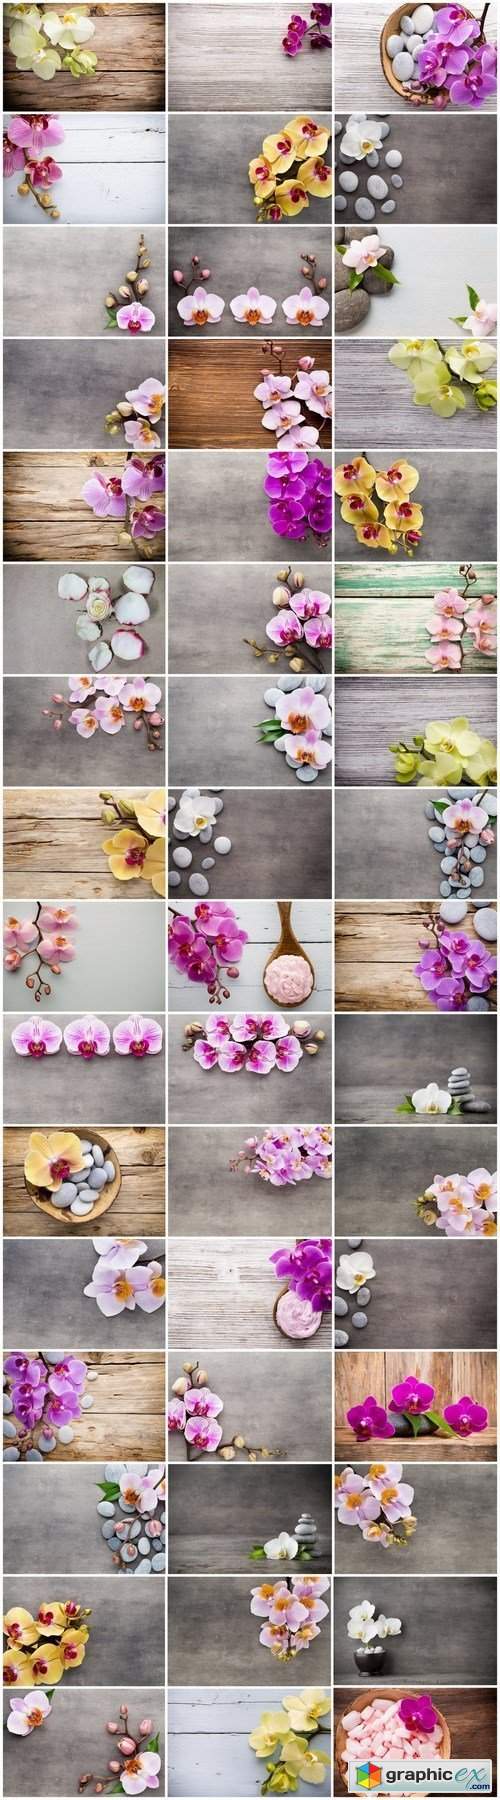  Orchid & SPA Backgrounds - Set of 50xUHQ JPEG Professional Stock Images 